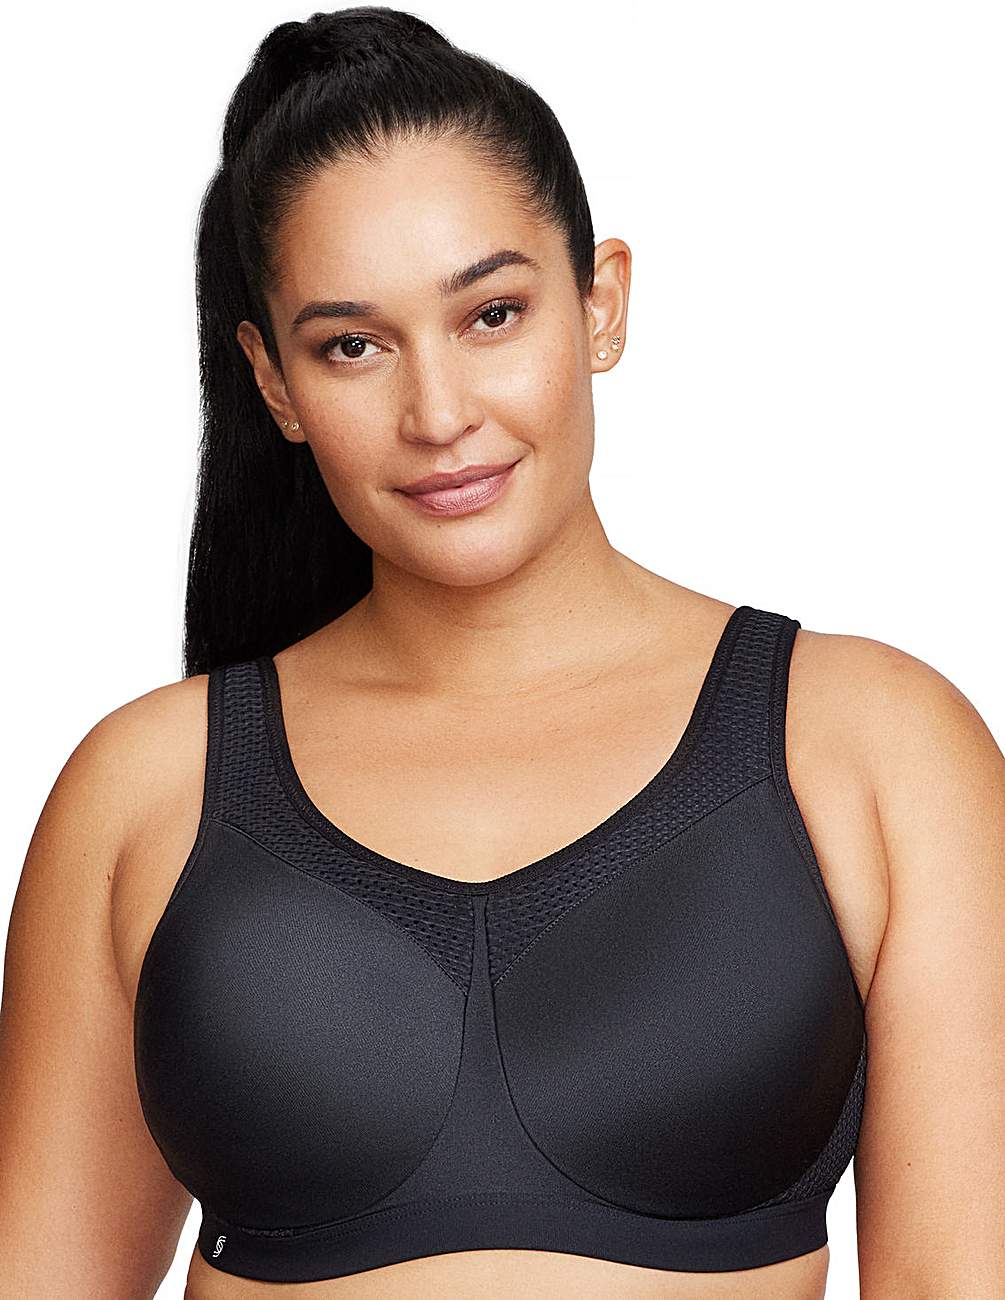 Review of the Glamorise Sport High Impact Underwire Sports Bra (9066) 